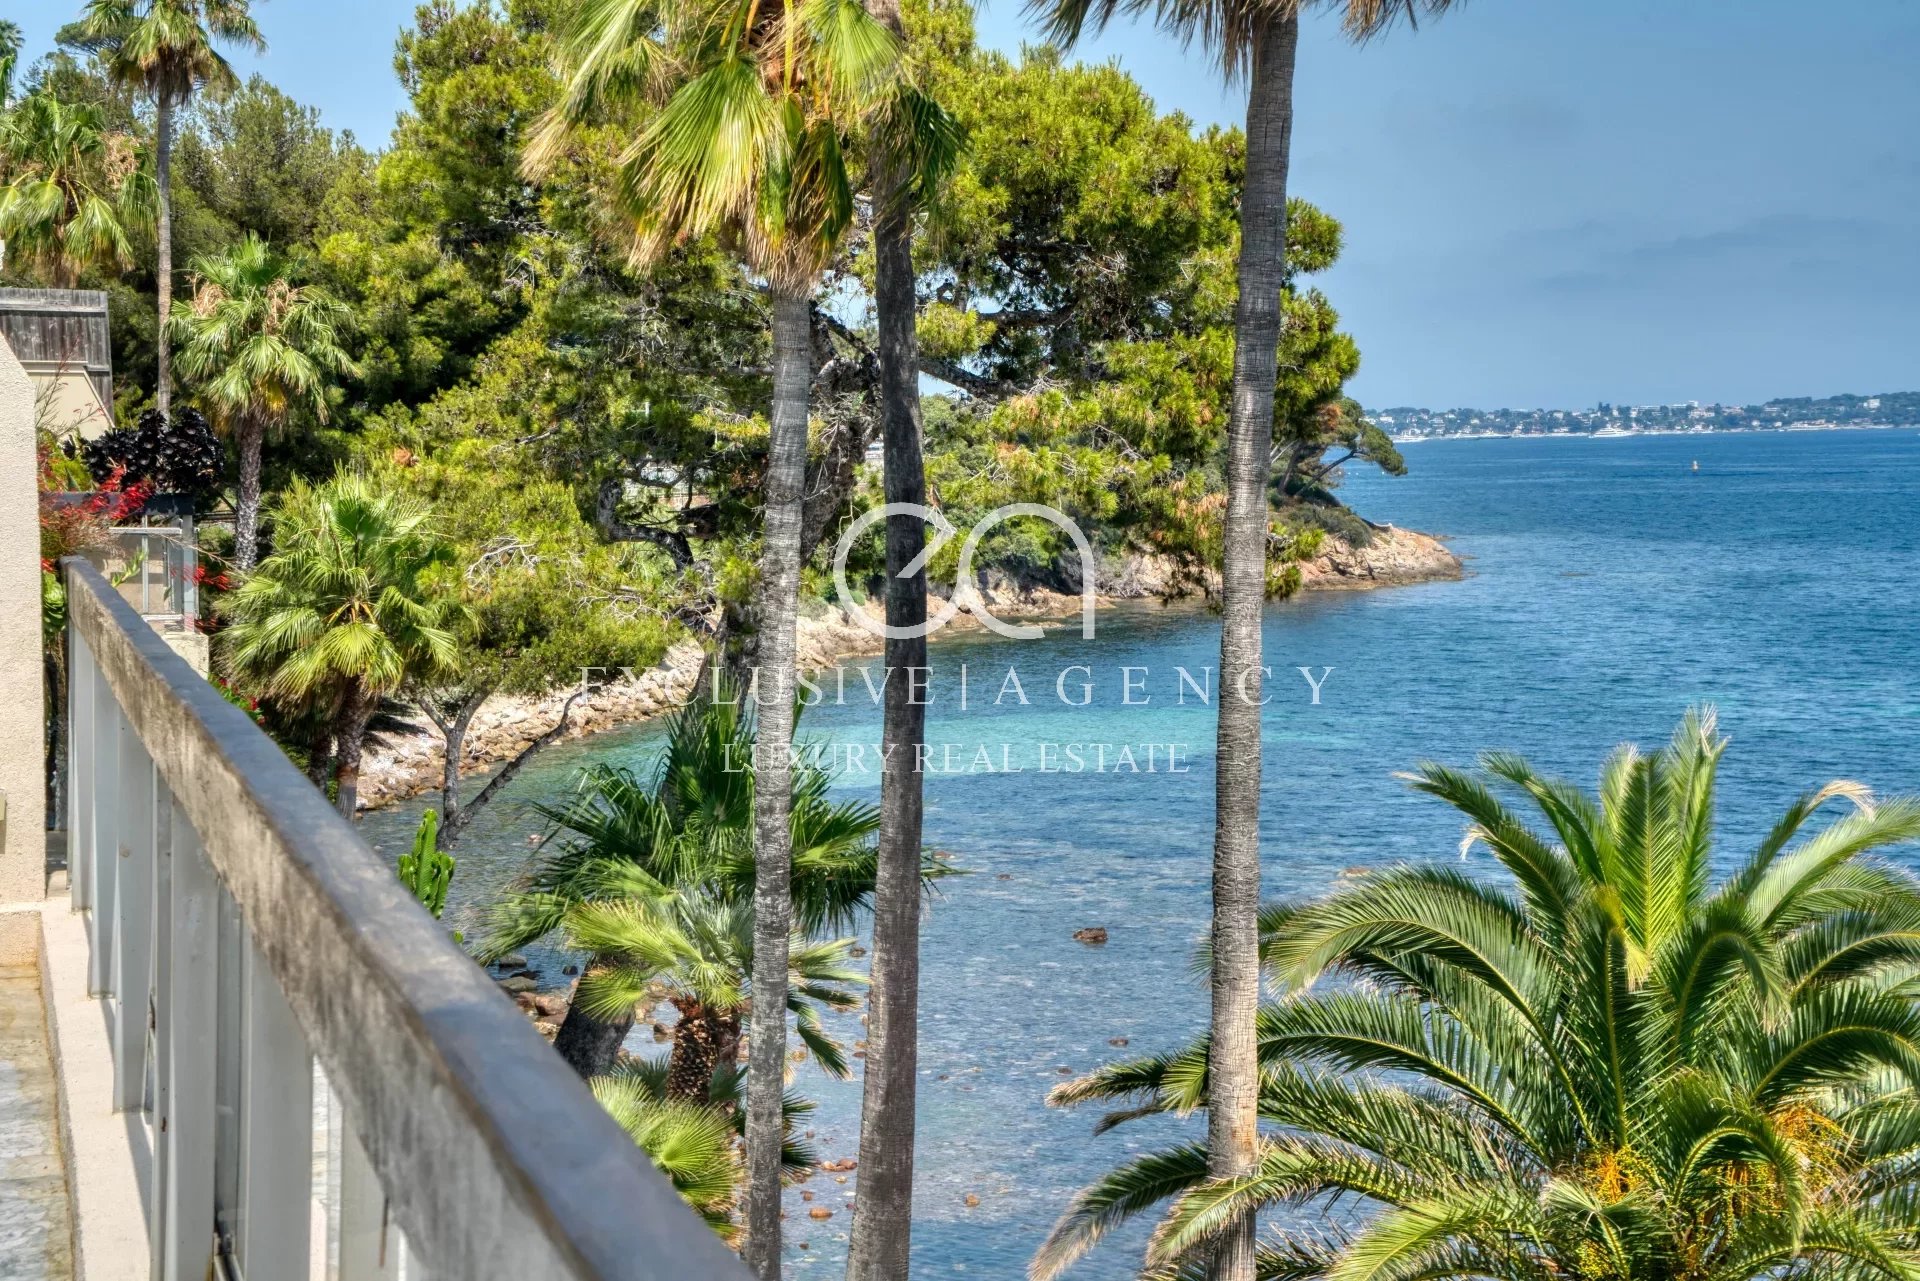 Cannes Palm Beach apartment 4 rooms 90m² feet in the water